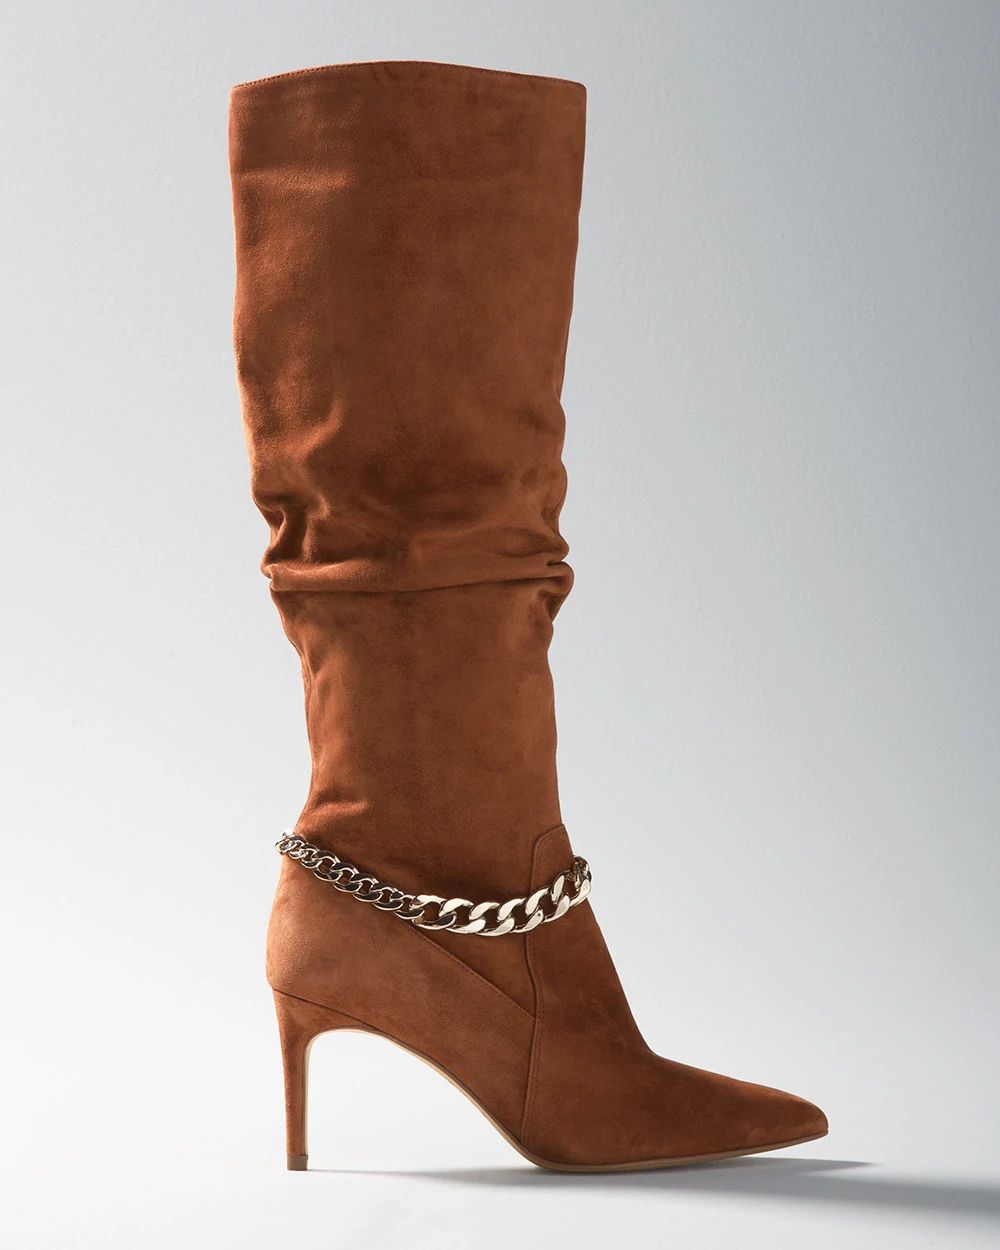 Suede Slouchy High-Heel Boot click to view larger image.